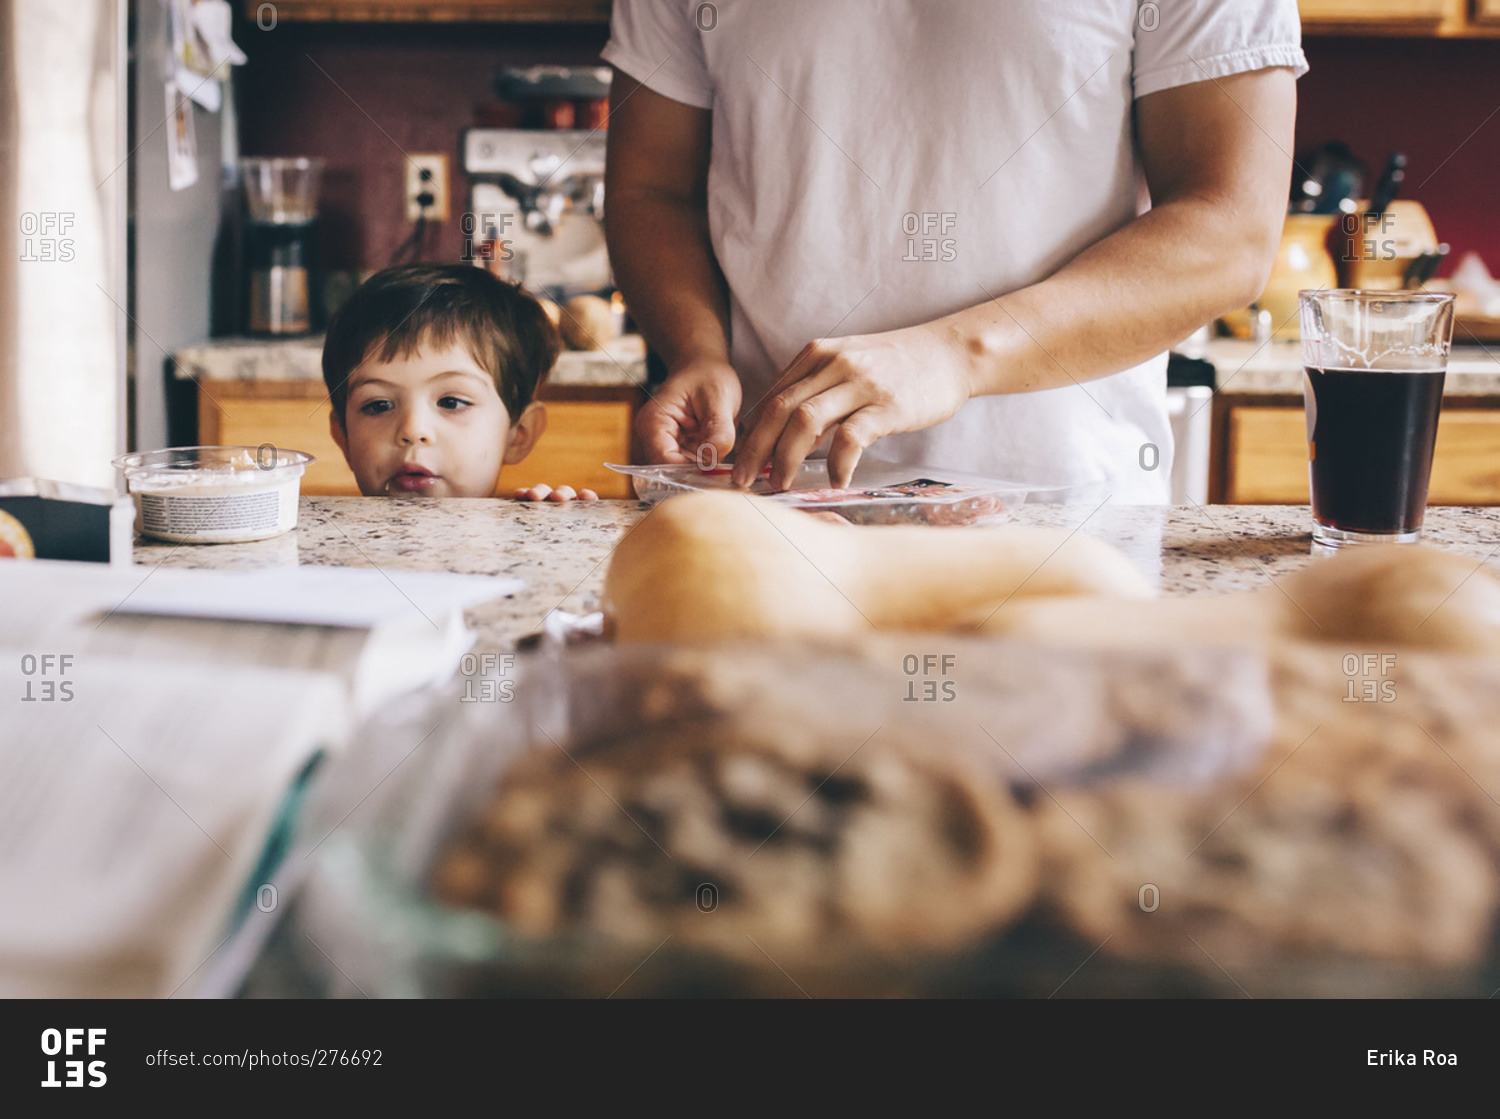 Child peers over counter while man preps Thanksgiving food